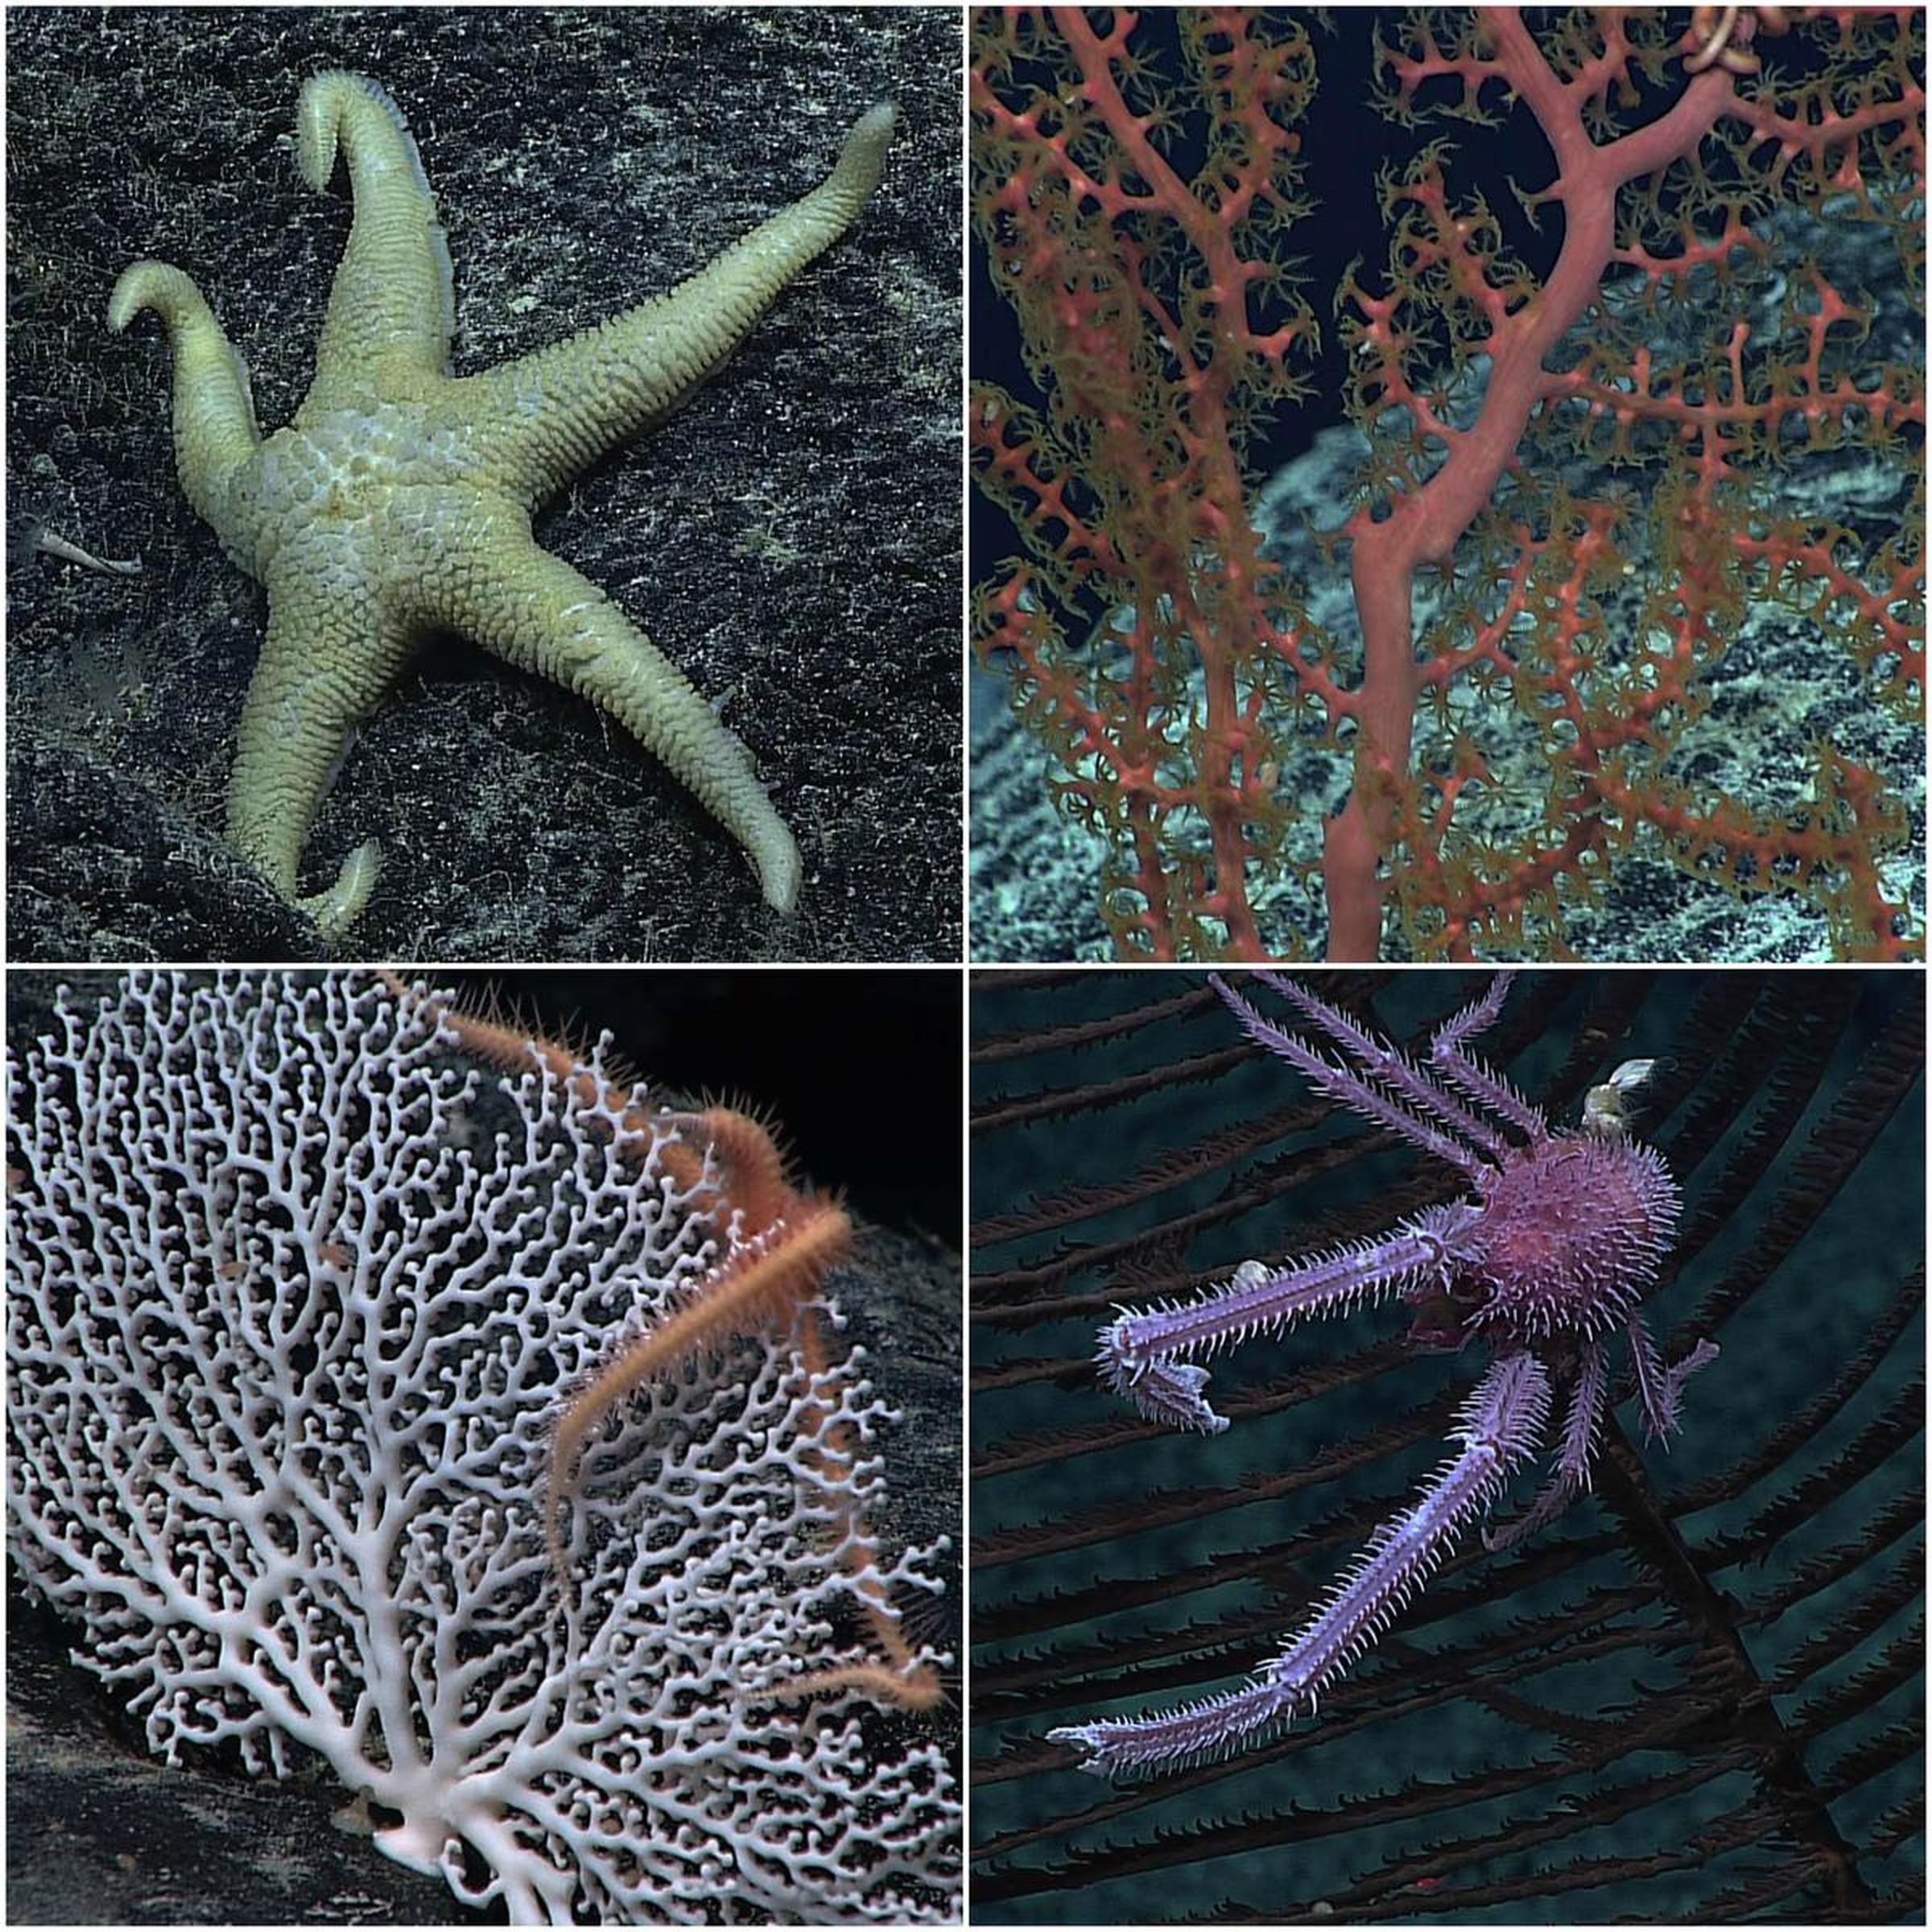 New species discovered by the Deep Discoverer ROV during a 2015 dive. From top left: Seastar, red coral, white coral, and a squat lobster.